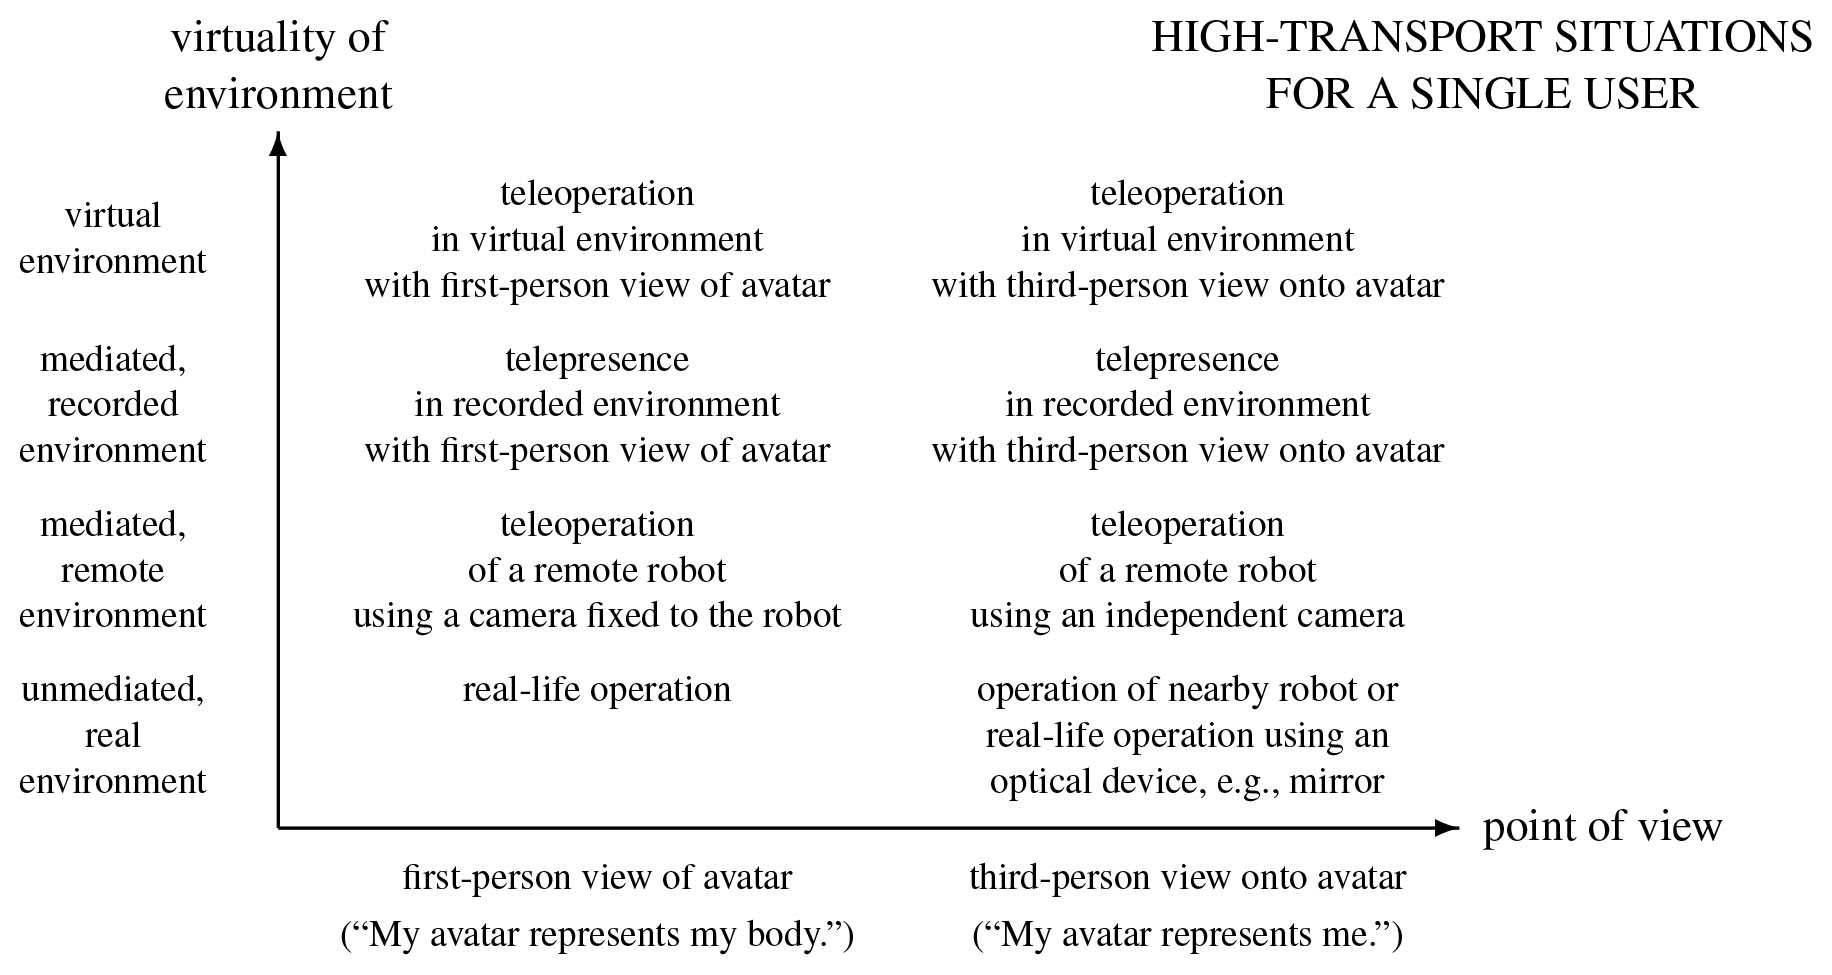 The dimensions of point of view (horizontal) and virtuality (vertical) of our classification for high-transport situations for a single user. The row labeled "unmediated, real environment" is an extension for real environments.